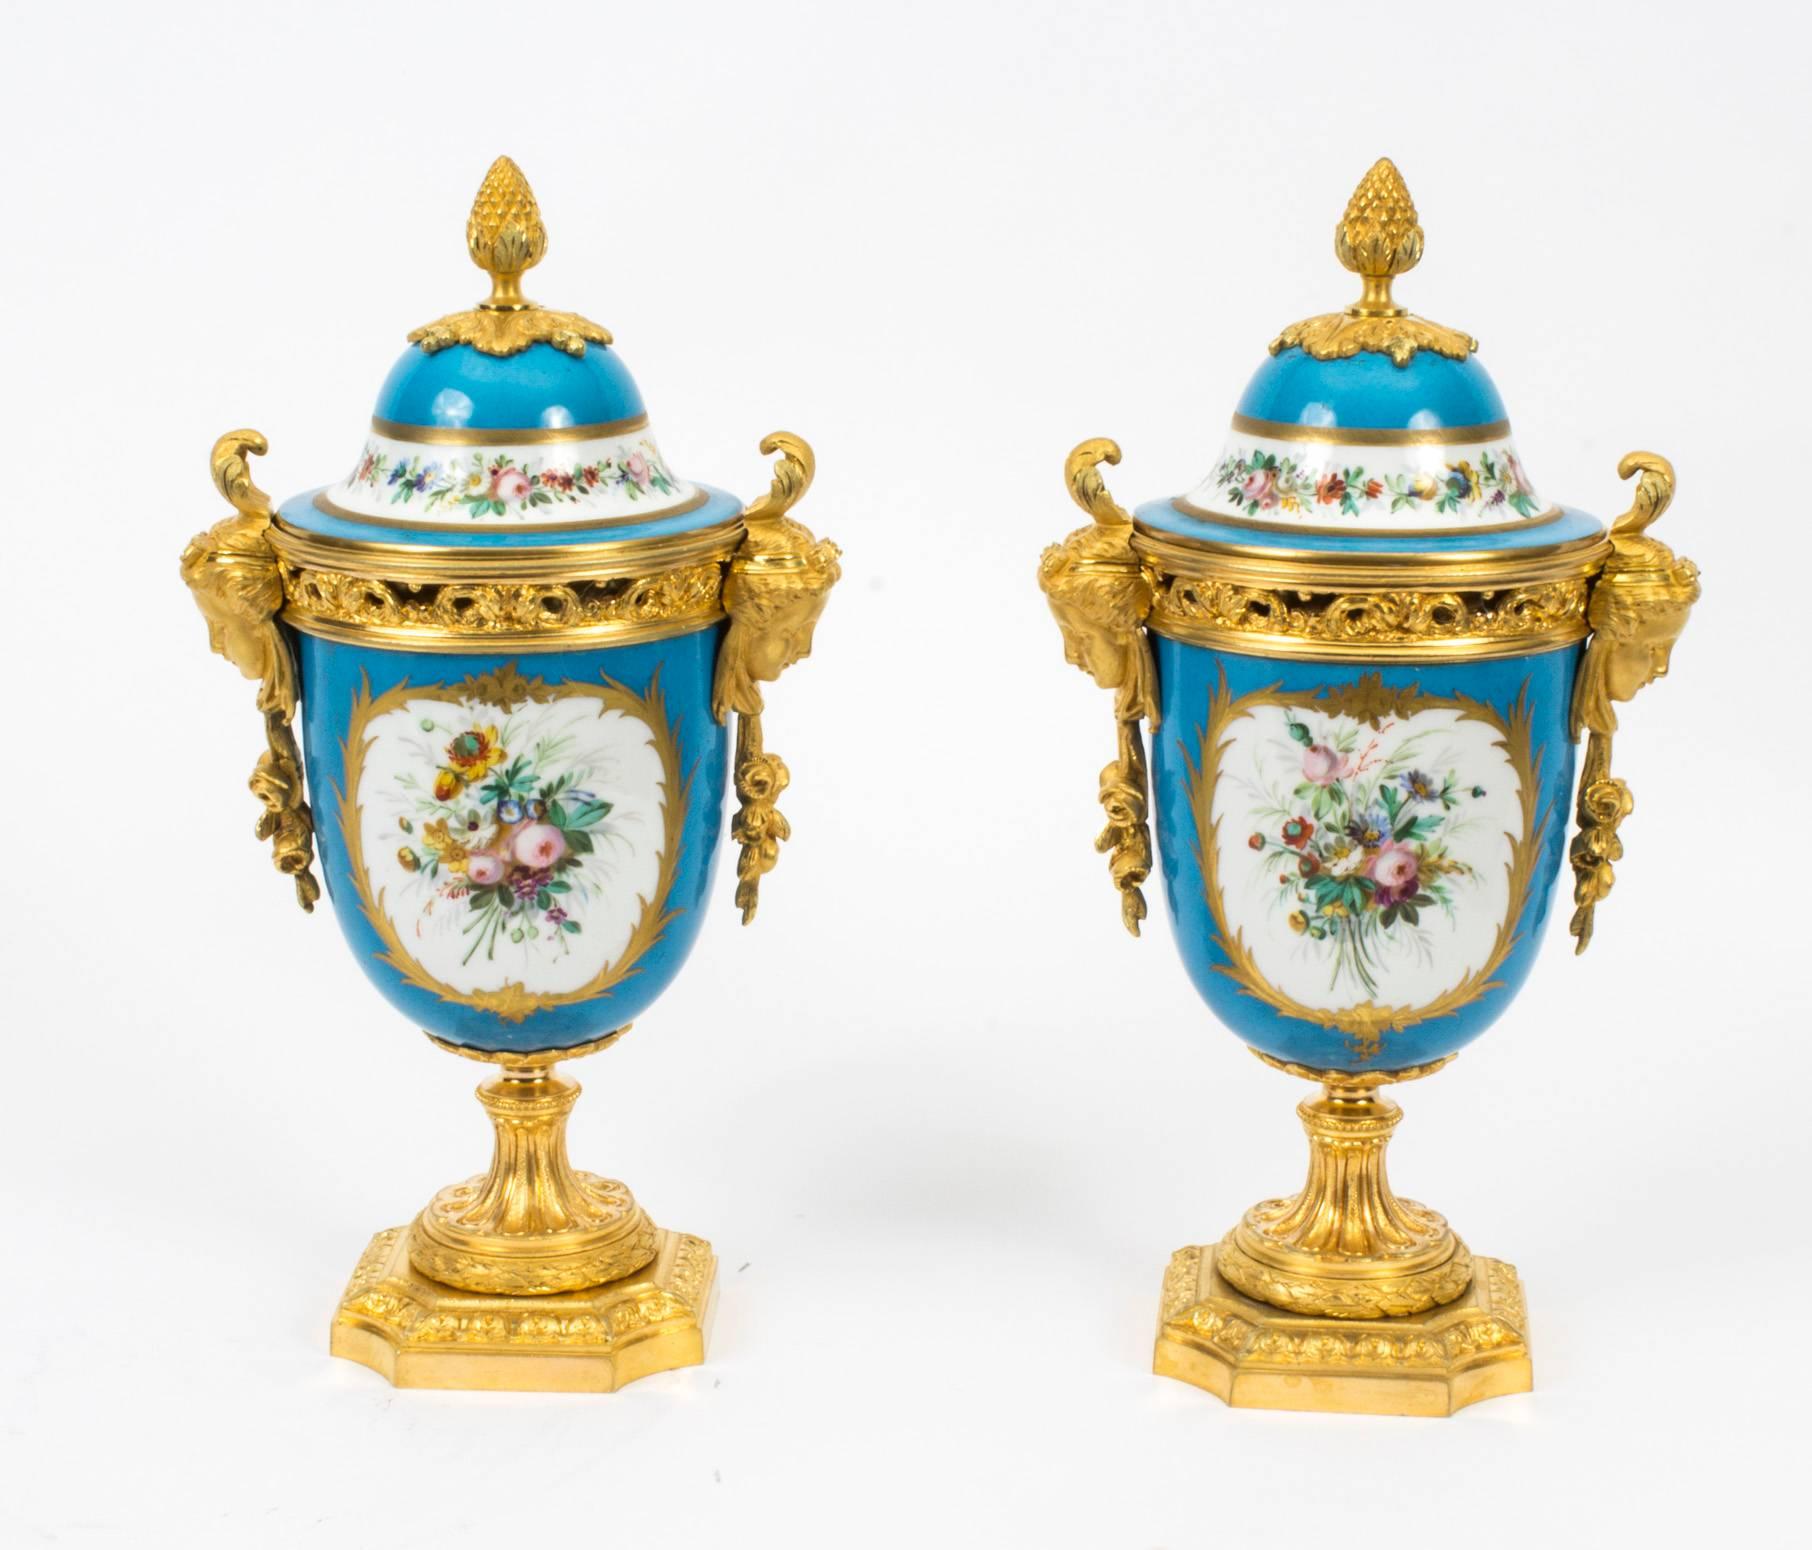 This is a beautiful antique pair of French Sèvres Porcelain and ormolu mounted garniture vases and covers, in Louis XV style, circa 1880 in date.

They are superbly decorated  in Sevres  Bleu Celeste with hand painted floral bouquets and ovals of